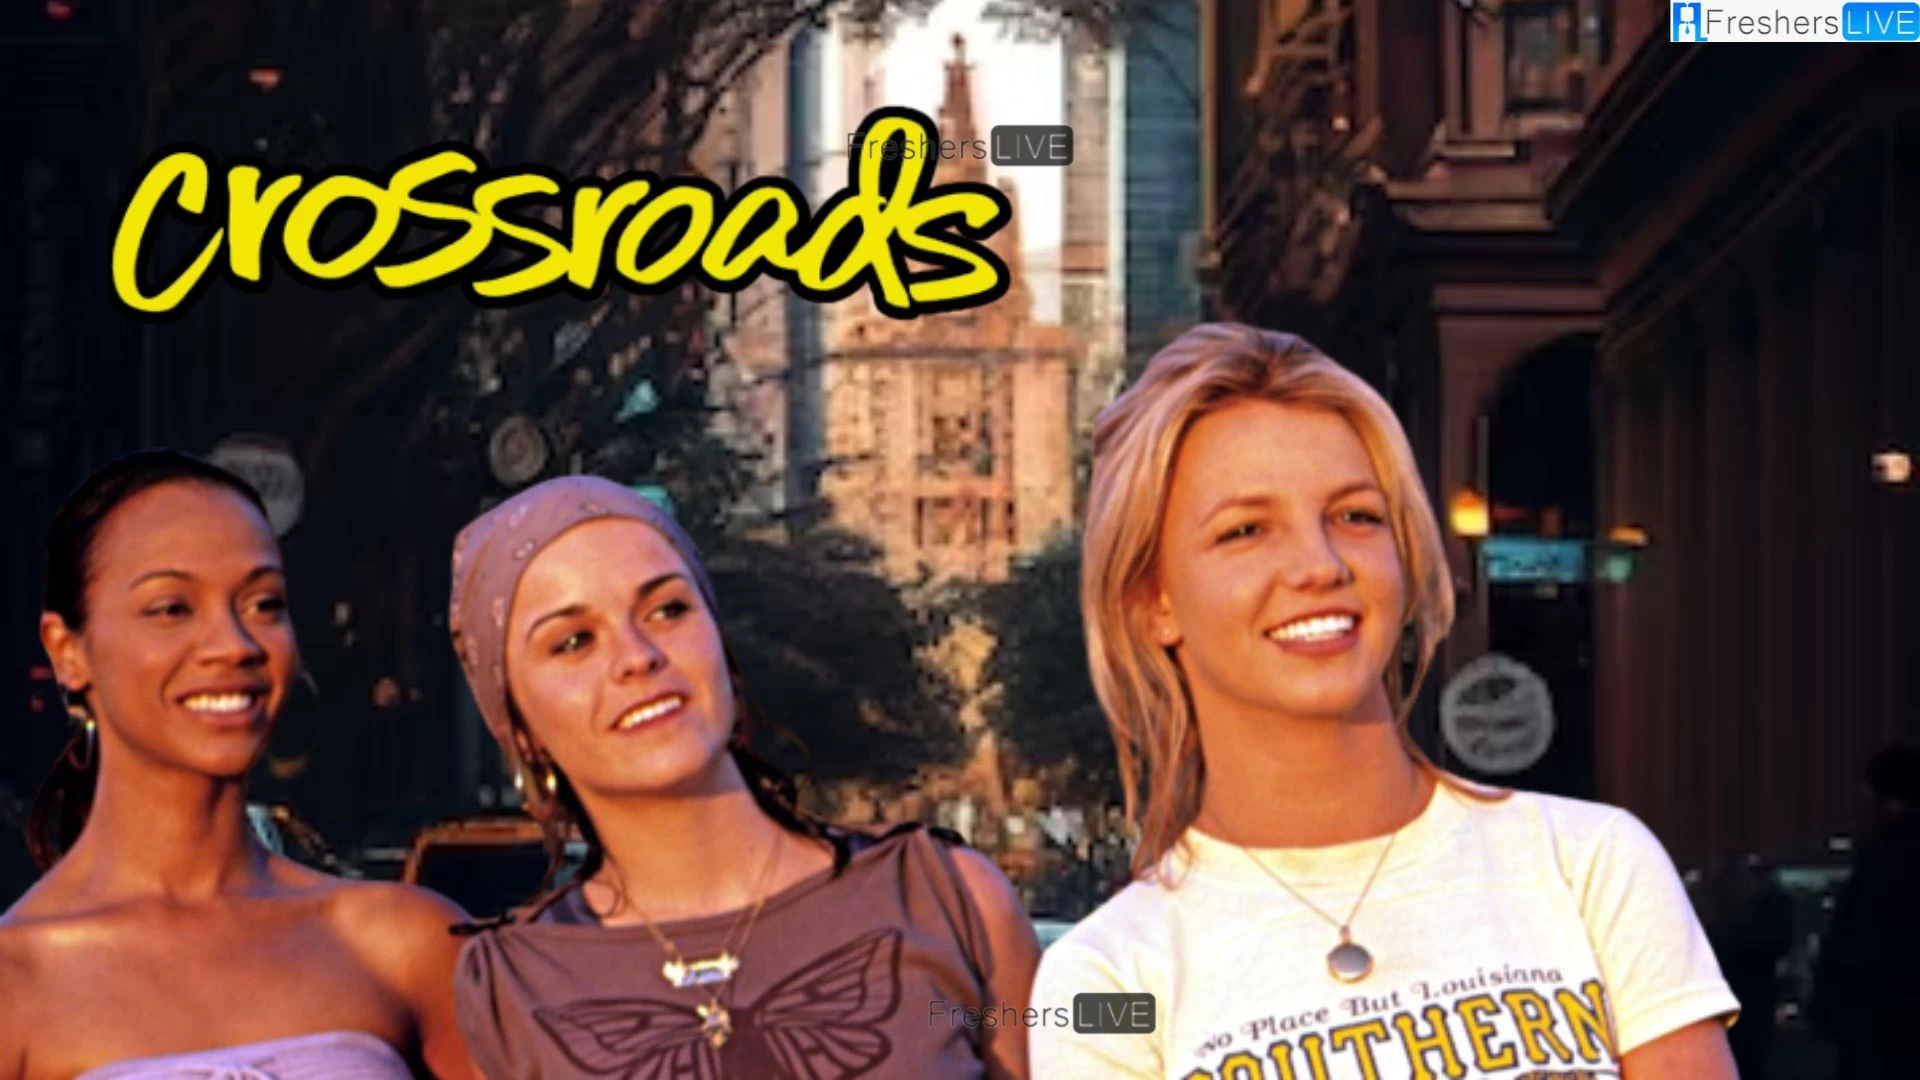 Is Britney Spears's 2002 Film Crossroads Returning to Theaters? Crossroads Re-Release Date